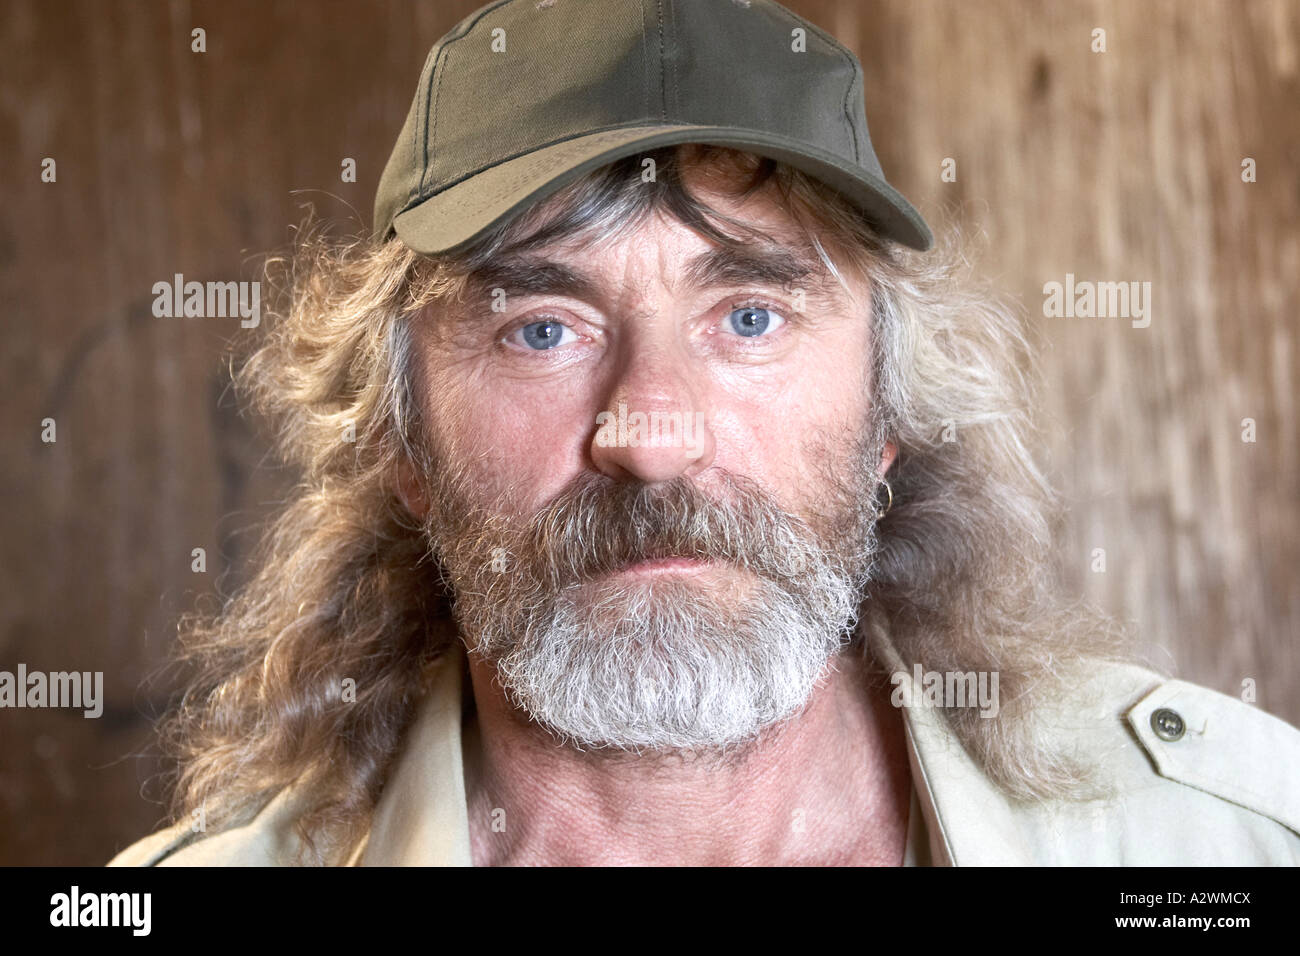 Mario Italian bearded man traveller and tourist visitor to Gonder in Ethiopia Africa Stock Photo